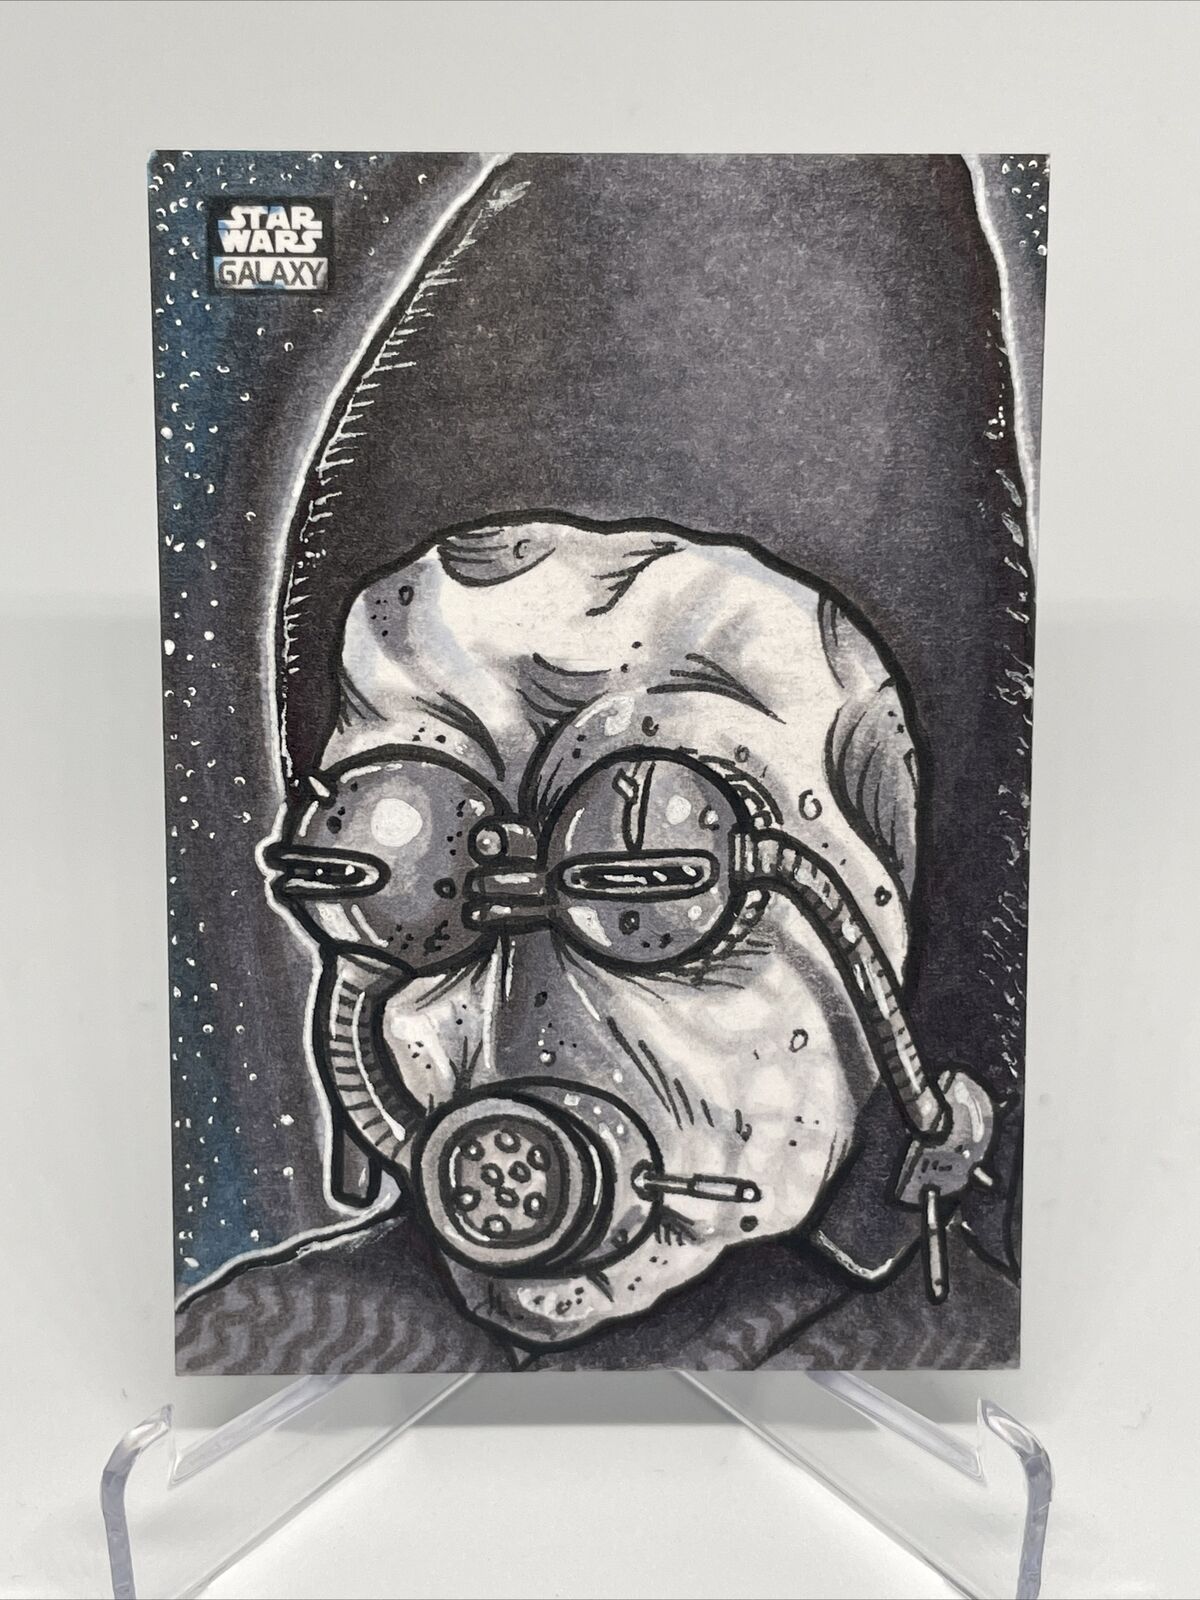 2022 Topps Chrome Star Wars GALAXY Sketch Card Tey How By Quinton Baker  1/1